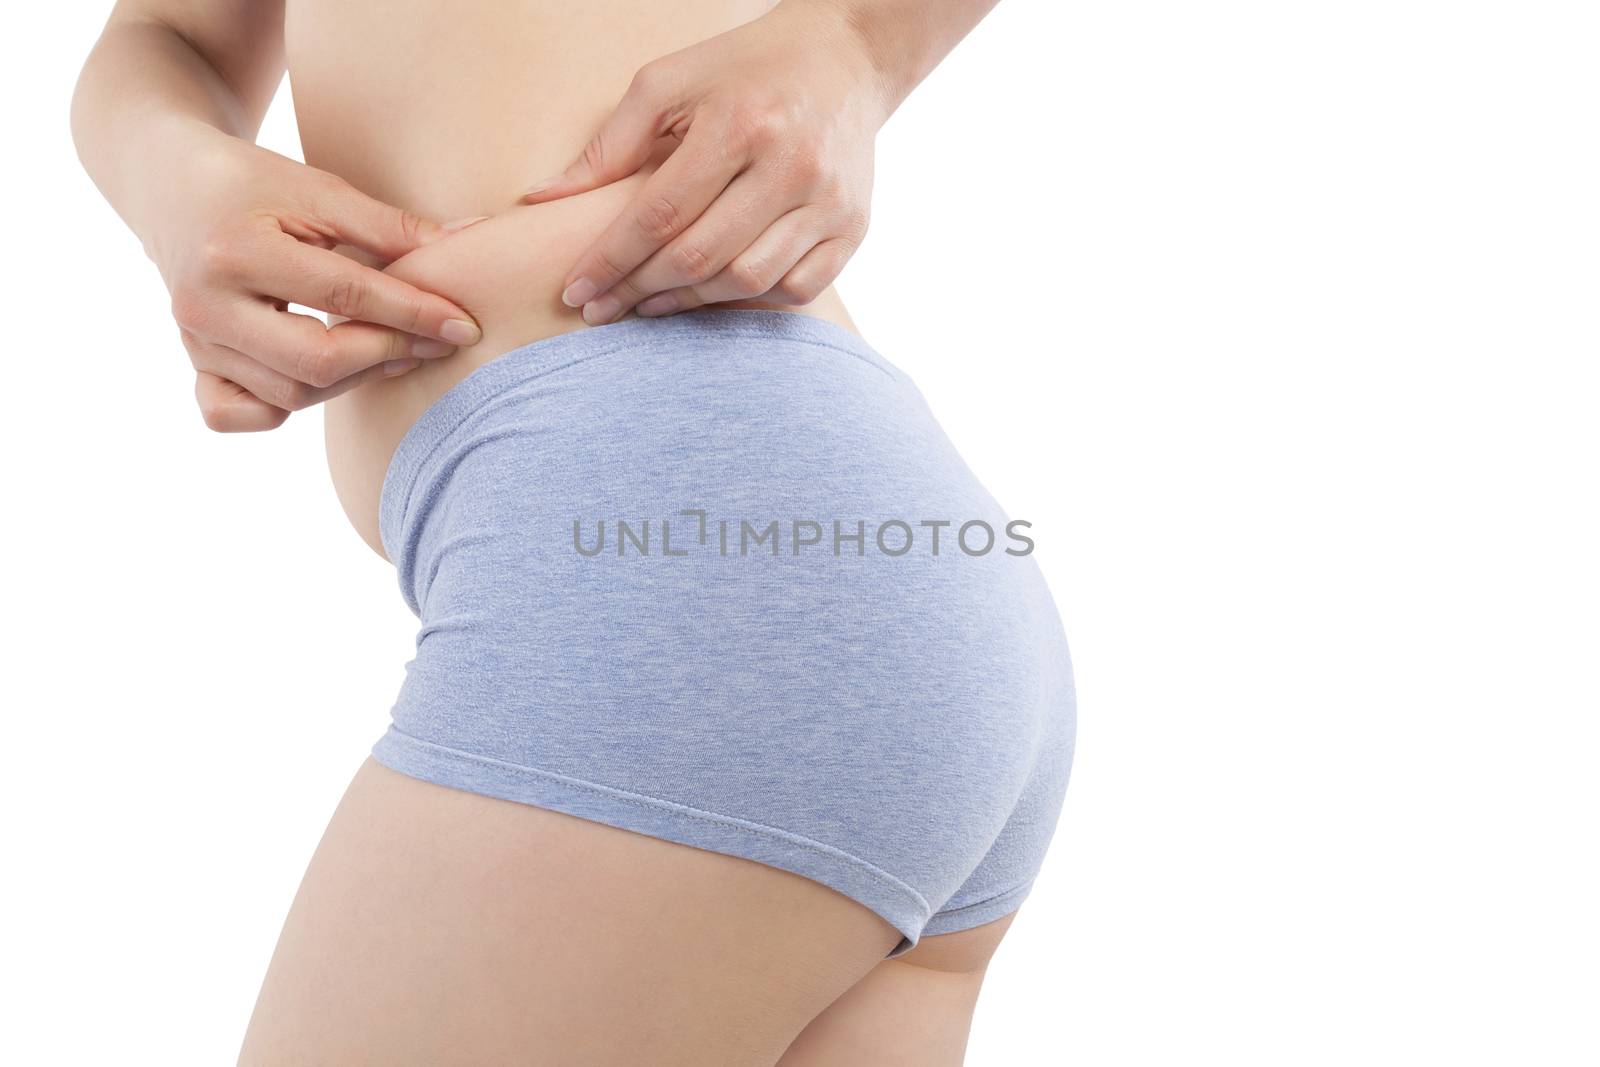 Girl in panties showing body fat on hips isolated on white background. Weight loss and plastic surgery concept.